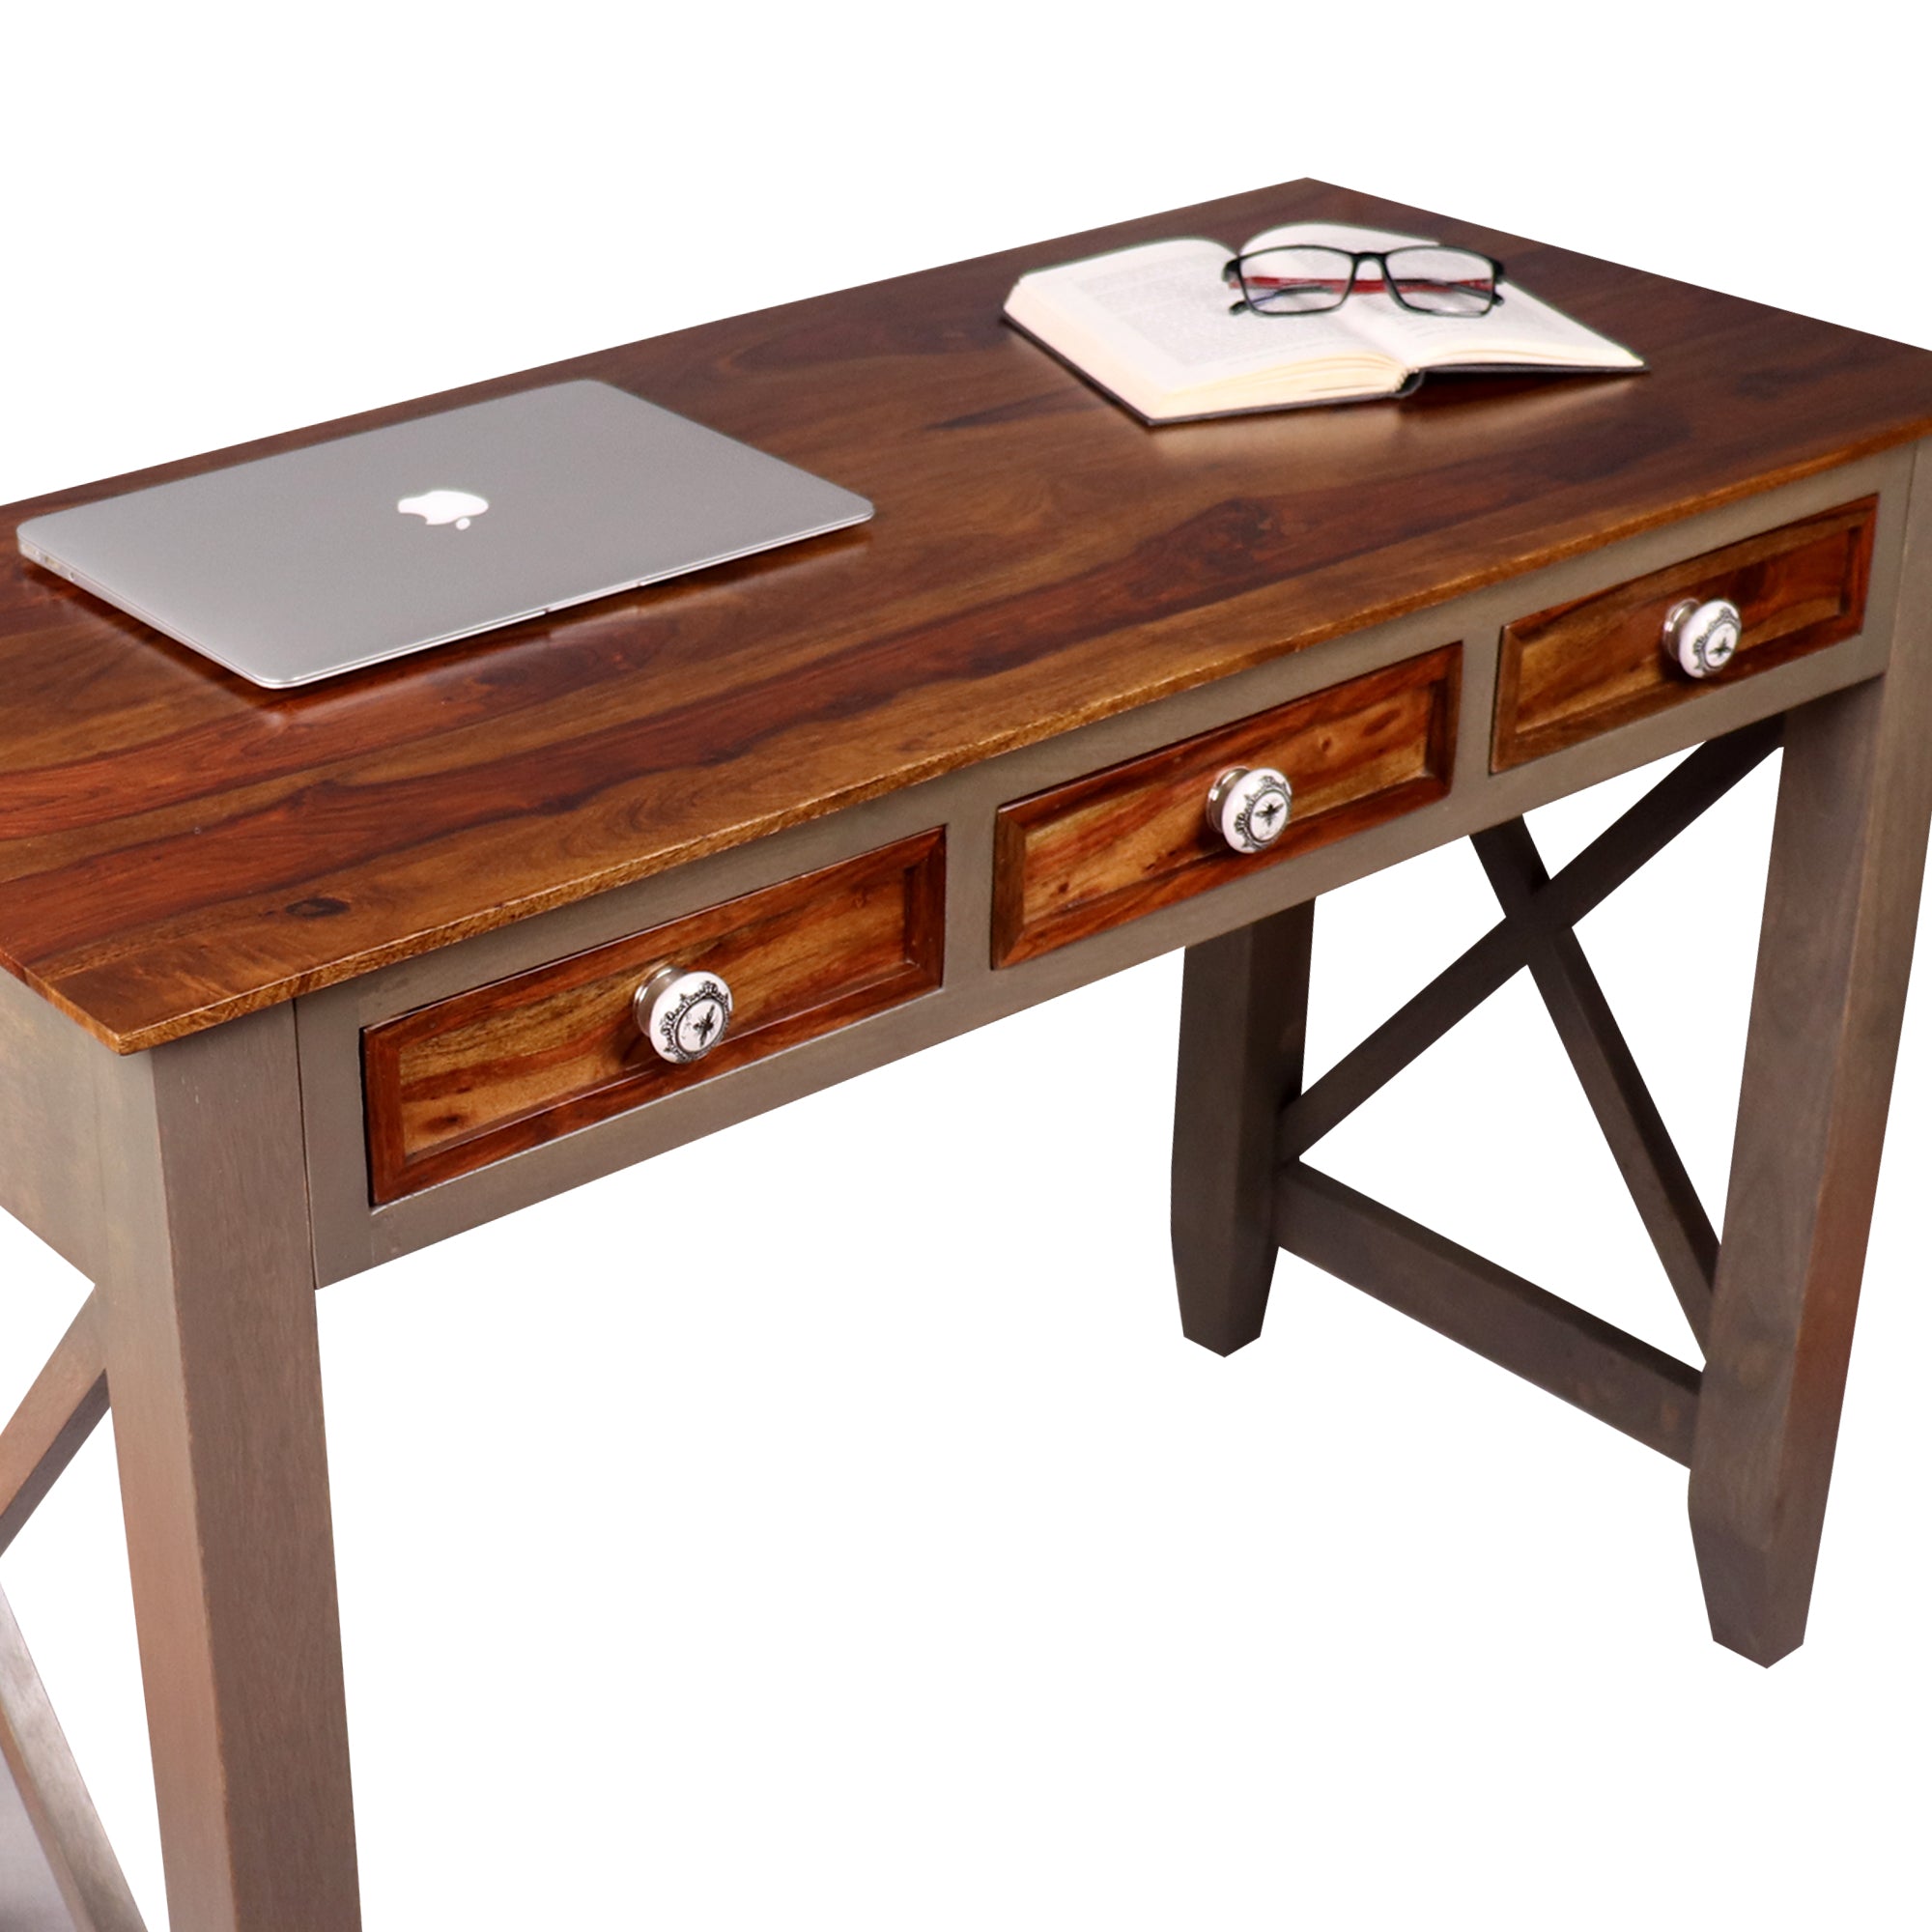 Wooden Study Tables online